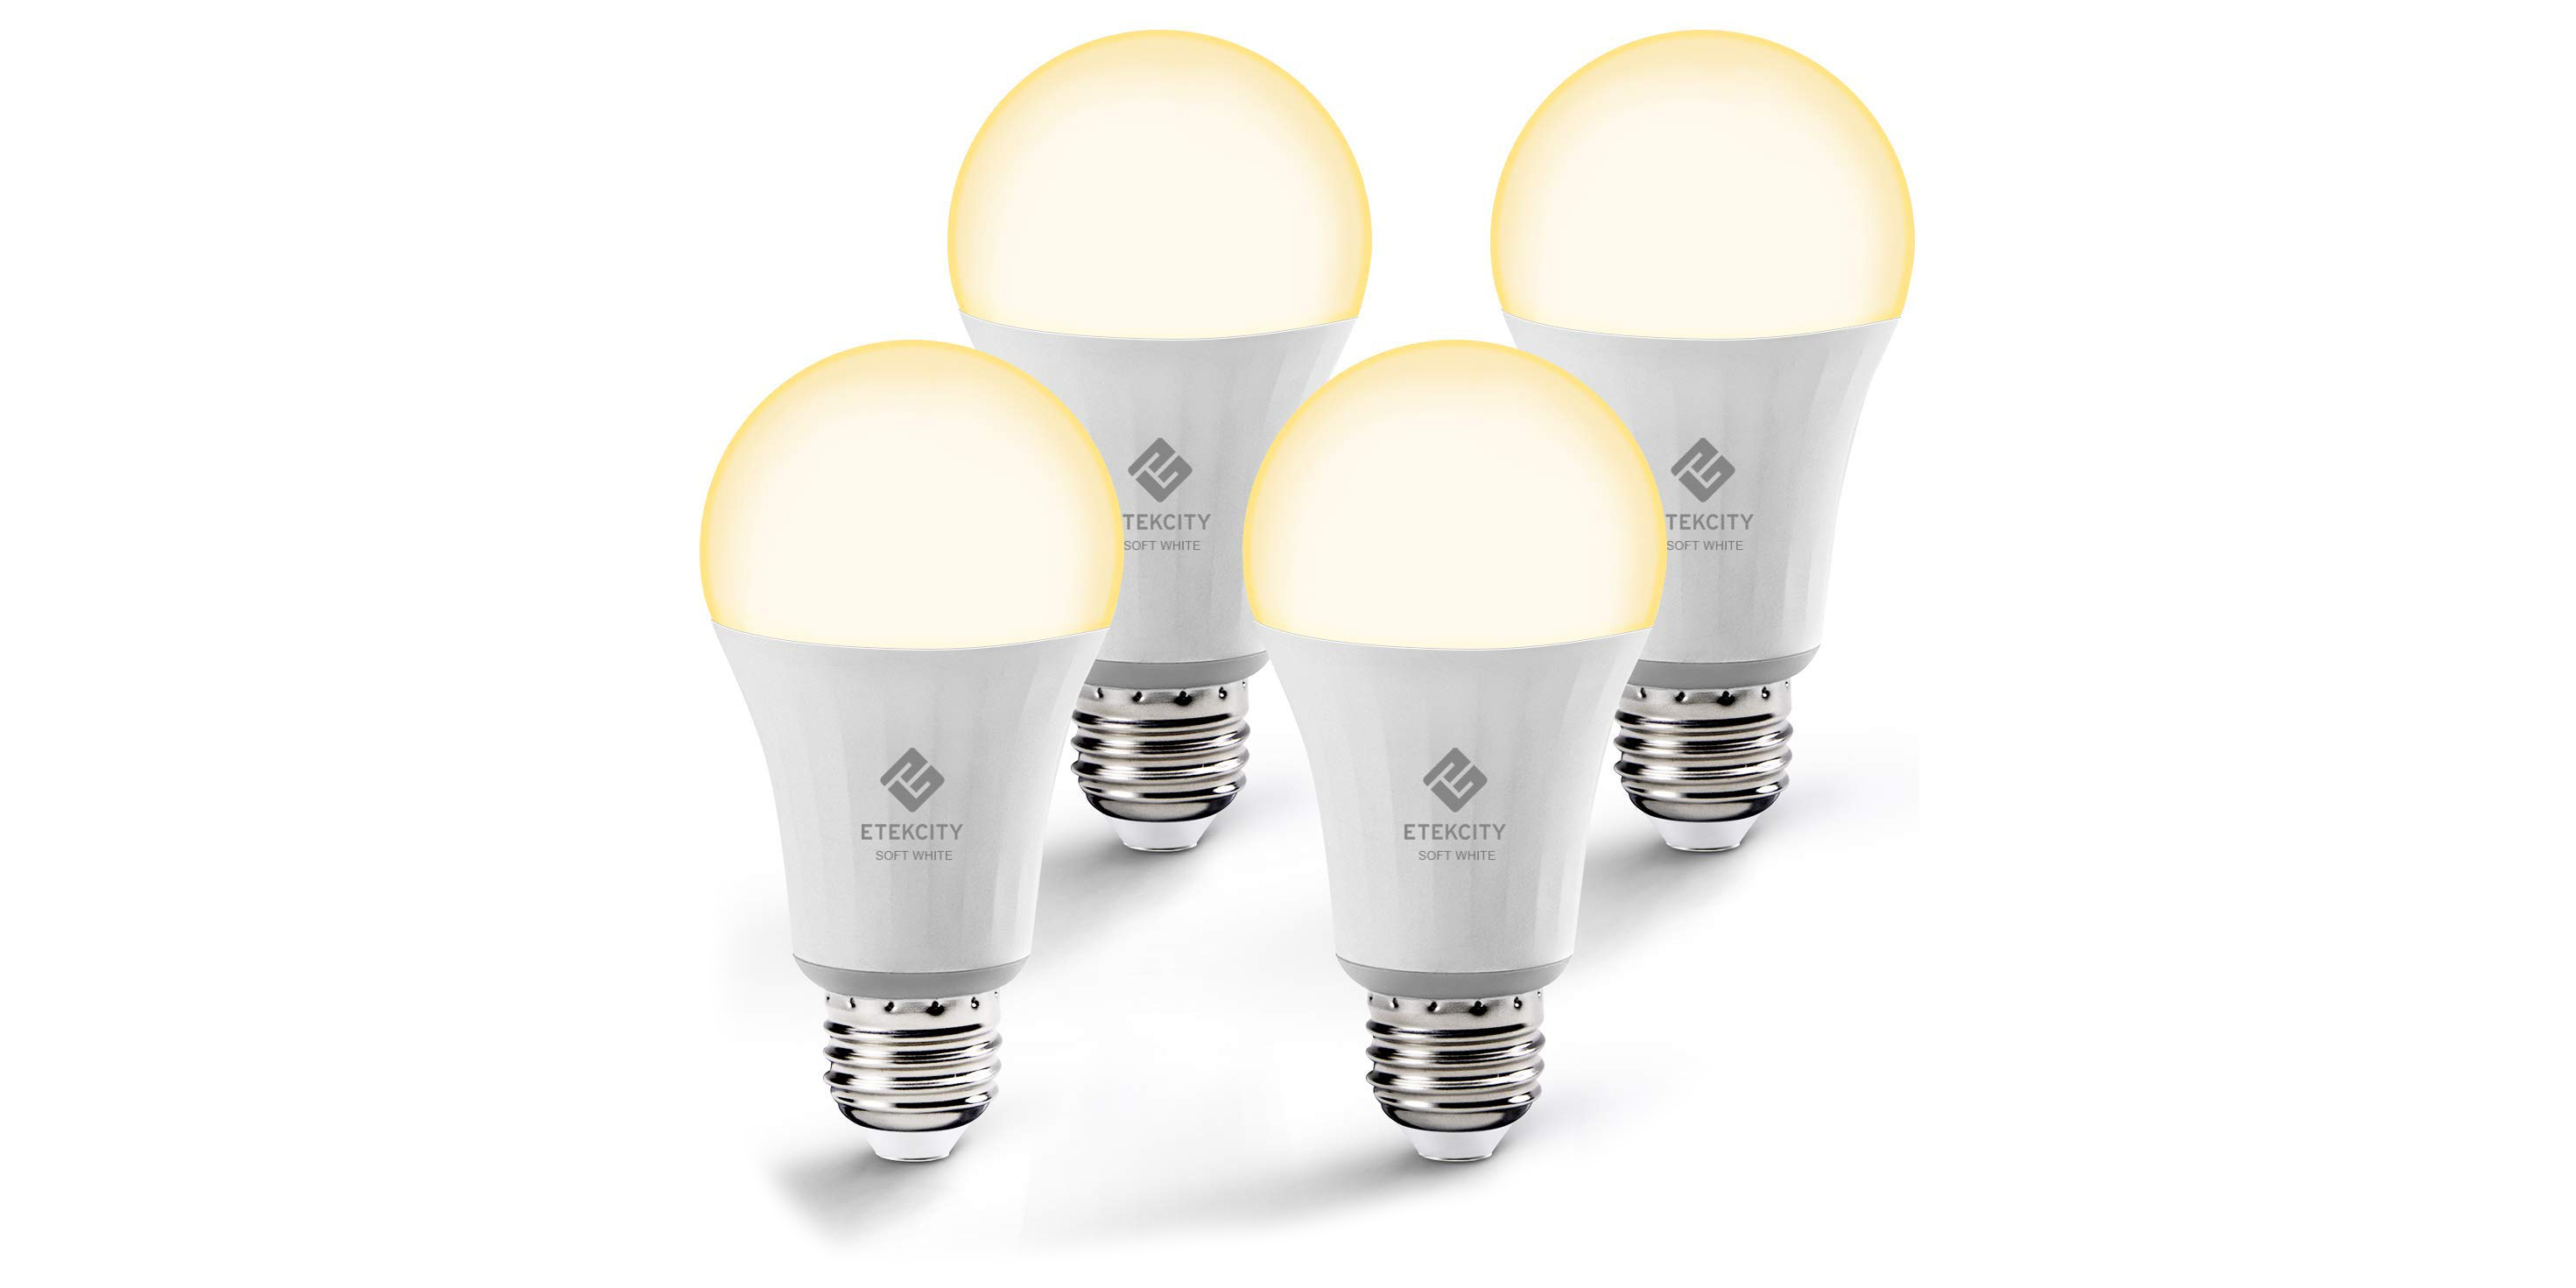 Pick up four smart LED A19 light bulbs for $38 (Reg. $50), more in today’s Green Deals